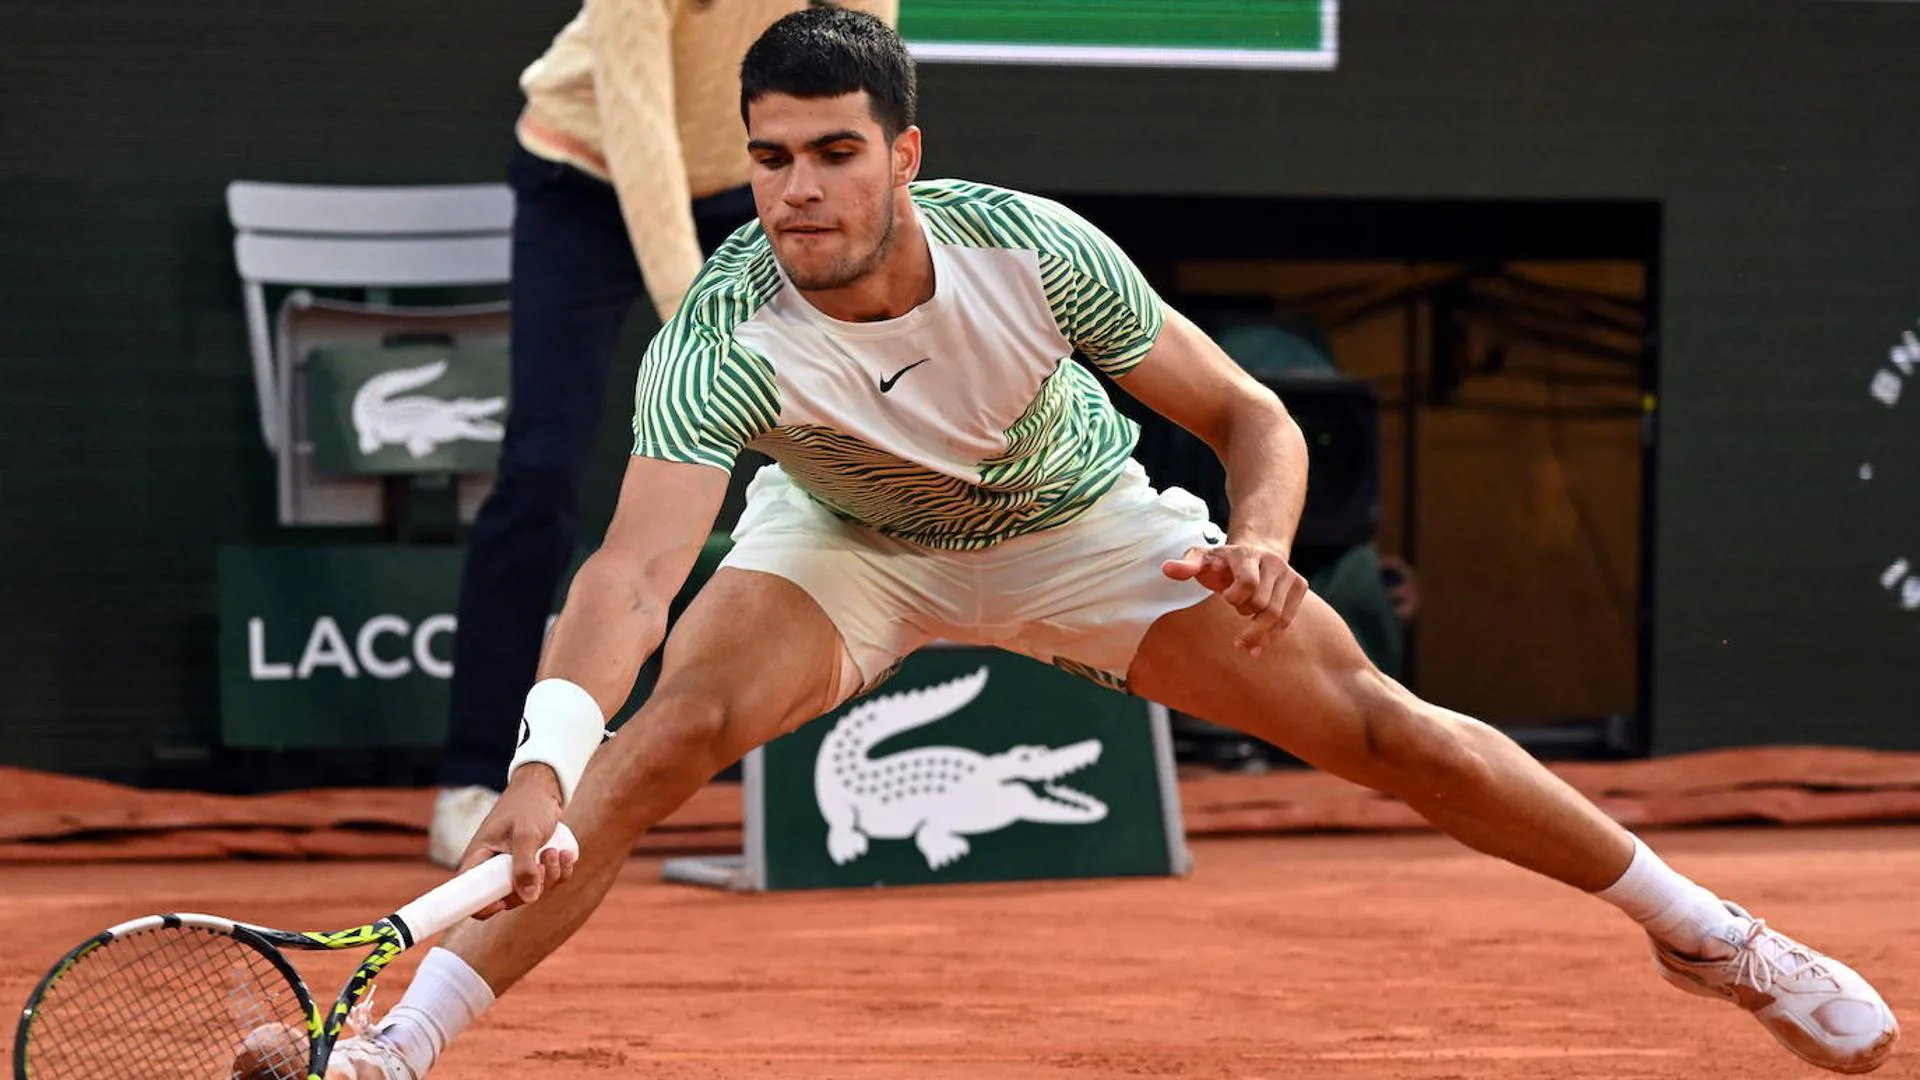 Schedule and where to watch Carlos Alcaraz’s match against Lorenzo Musetti at Roland Garros